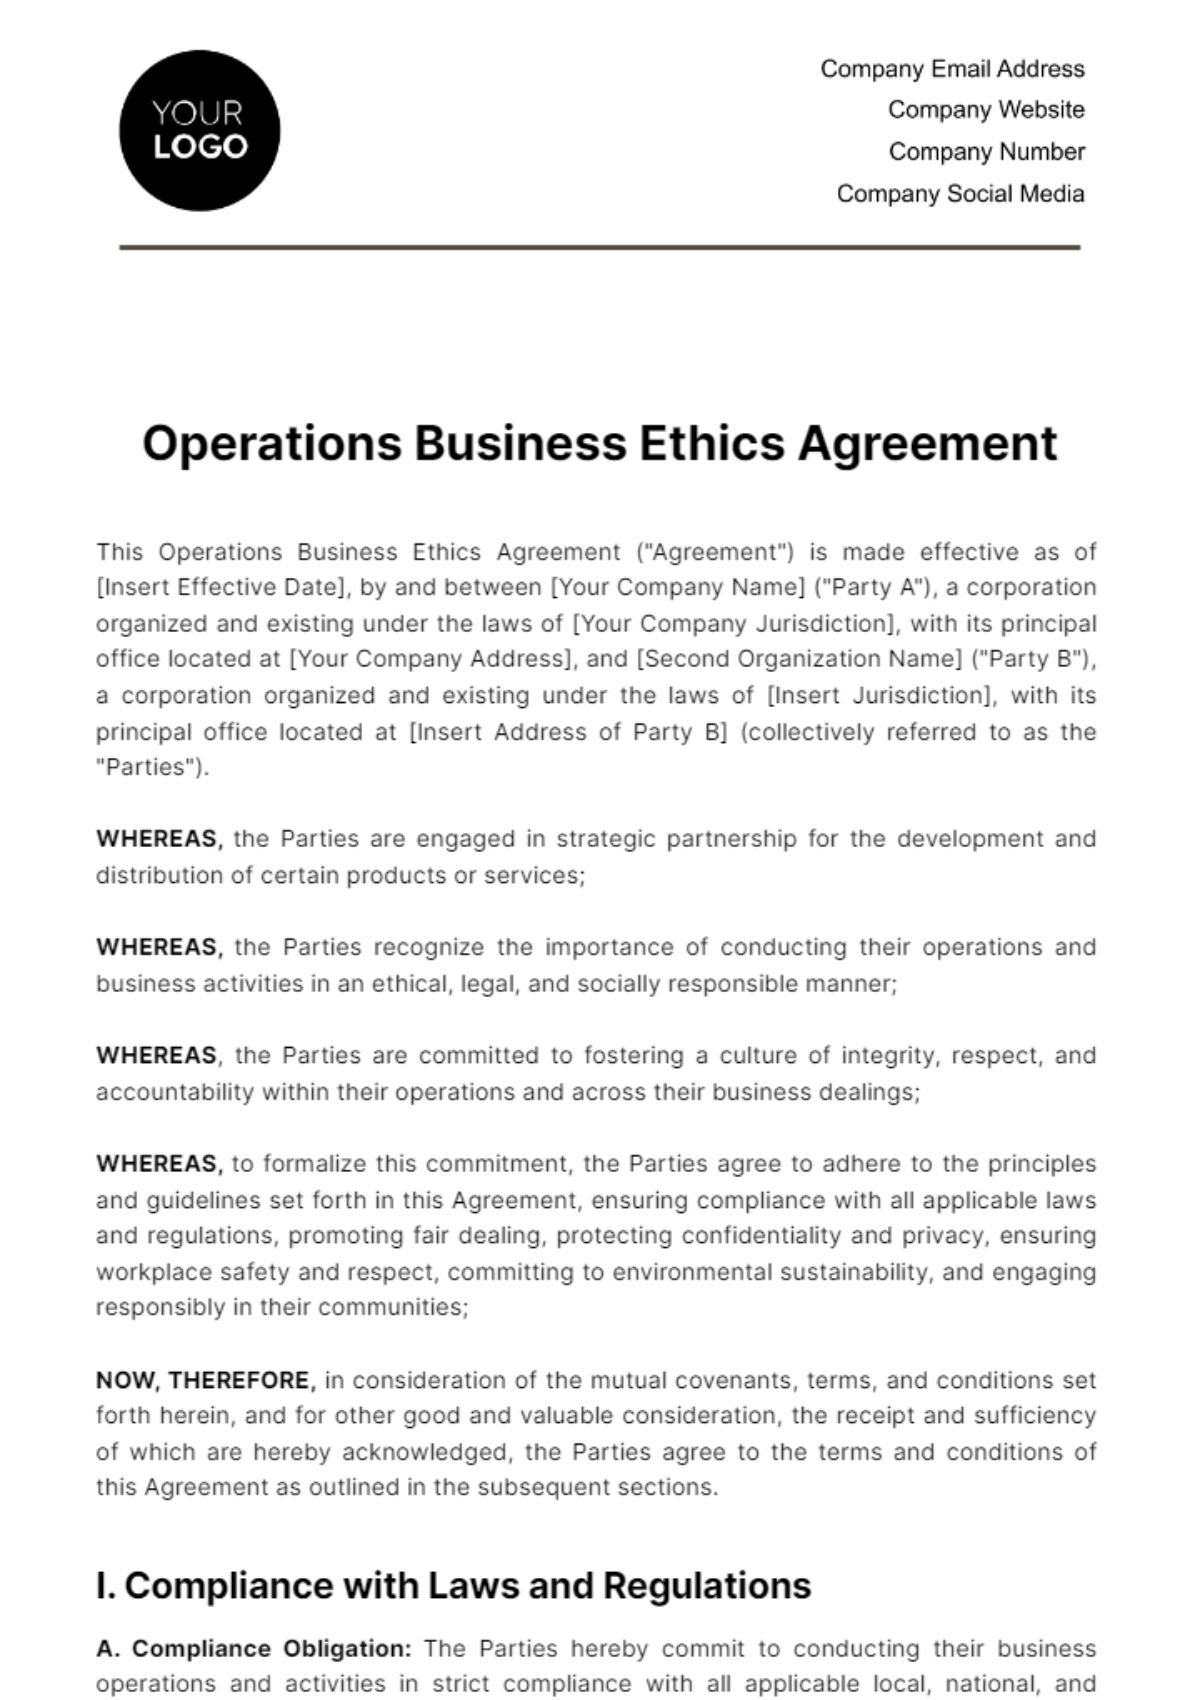 Free Operations Business Ethics Agreement Template